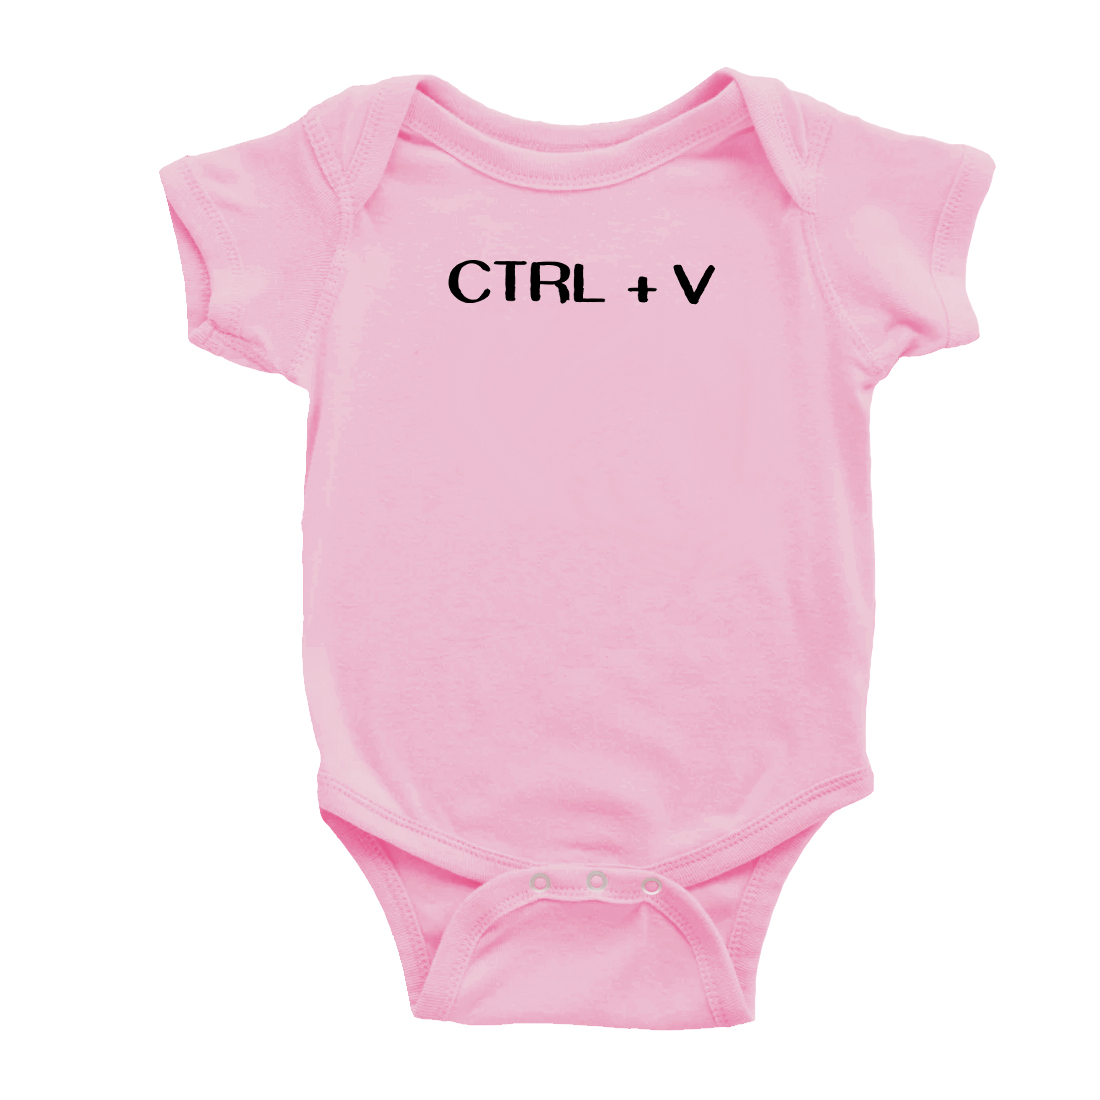 Twin Babys Funny Ctrl + C Ctrl + V Printed Infant Baby Cotton Bodysuits (Pink, 12-18M) - image 3 of 5